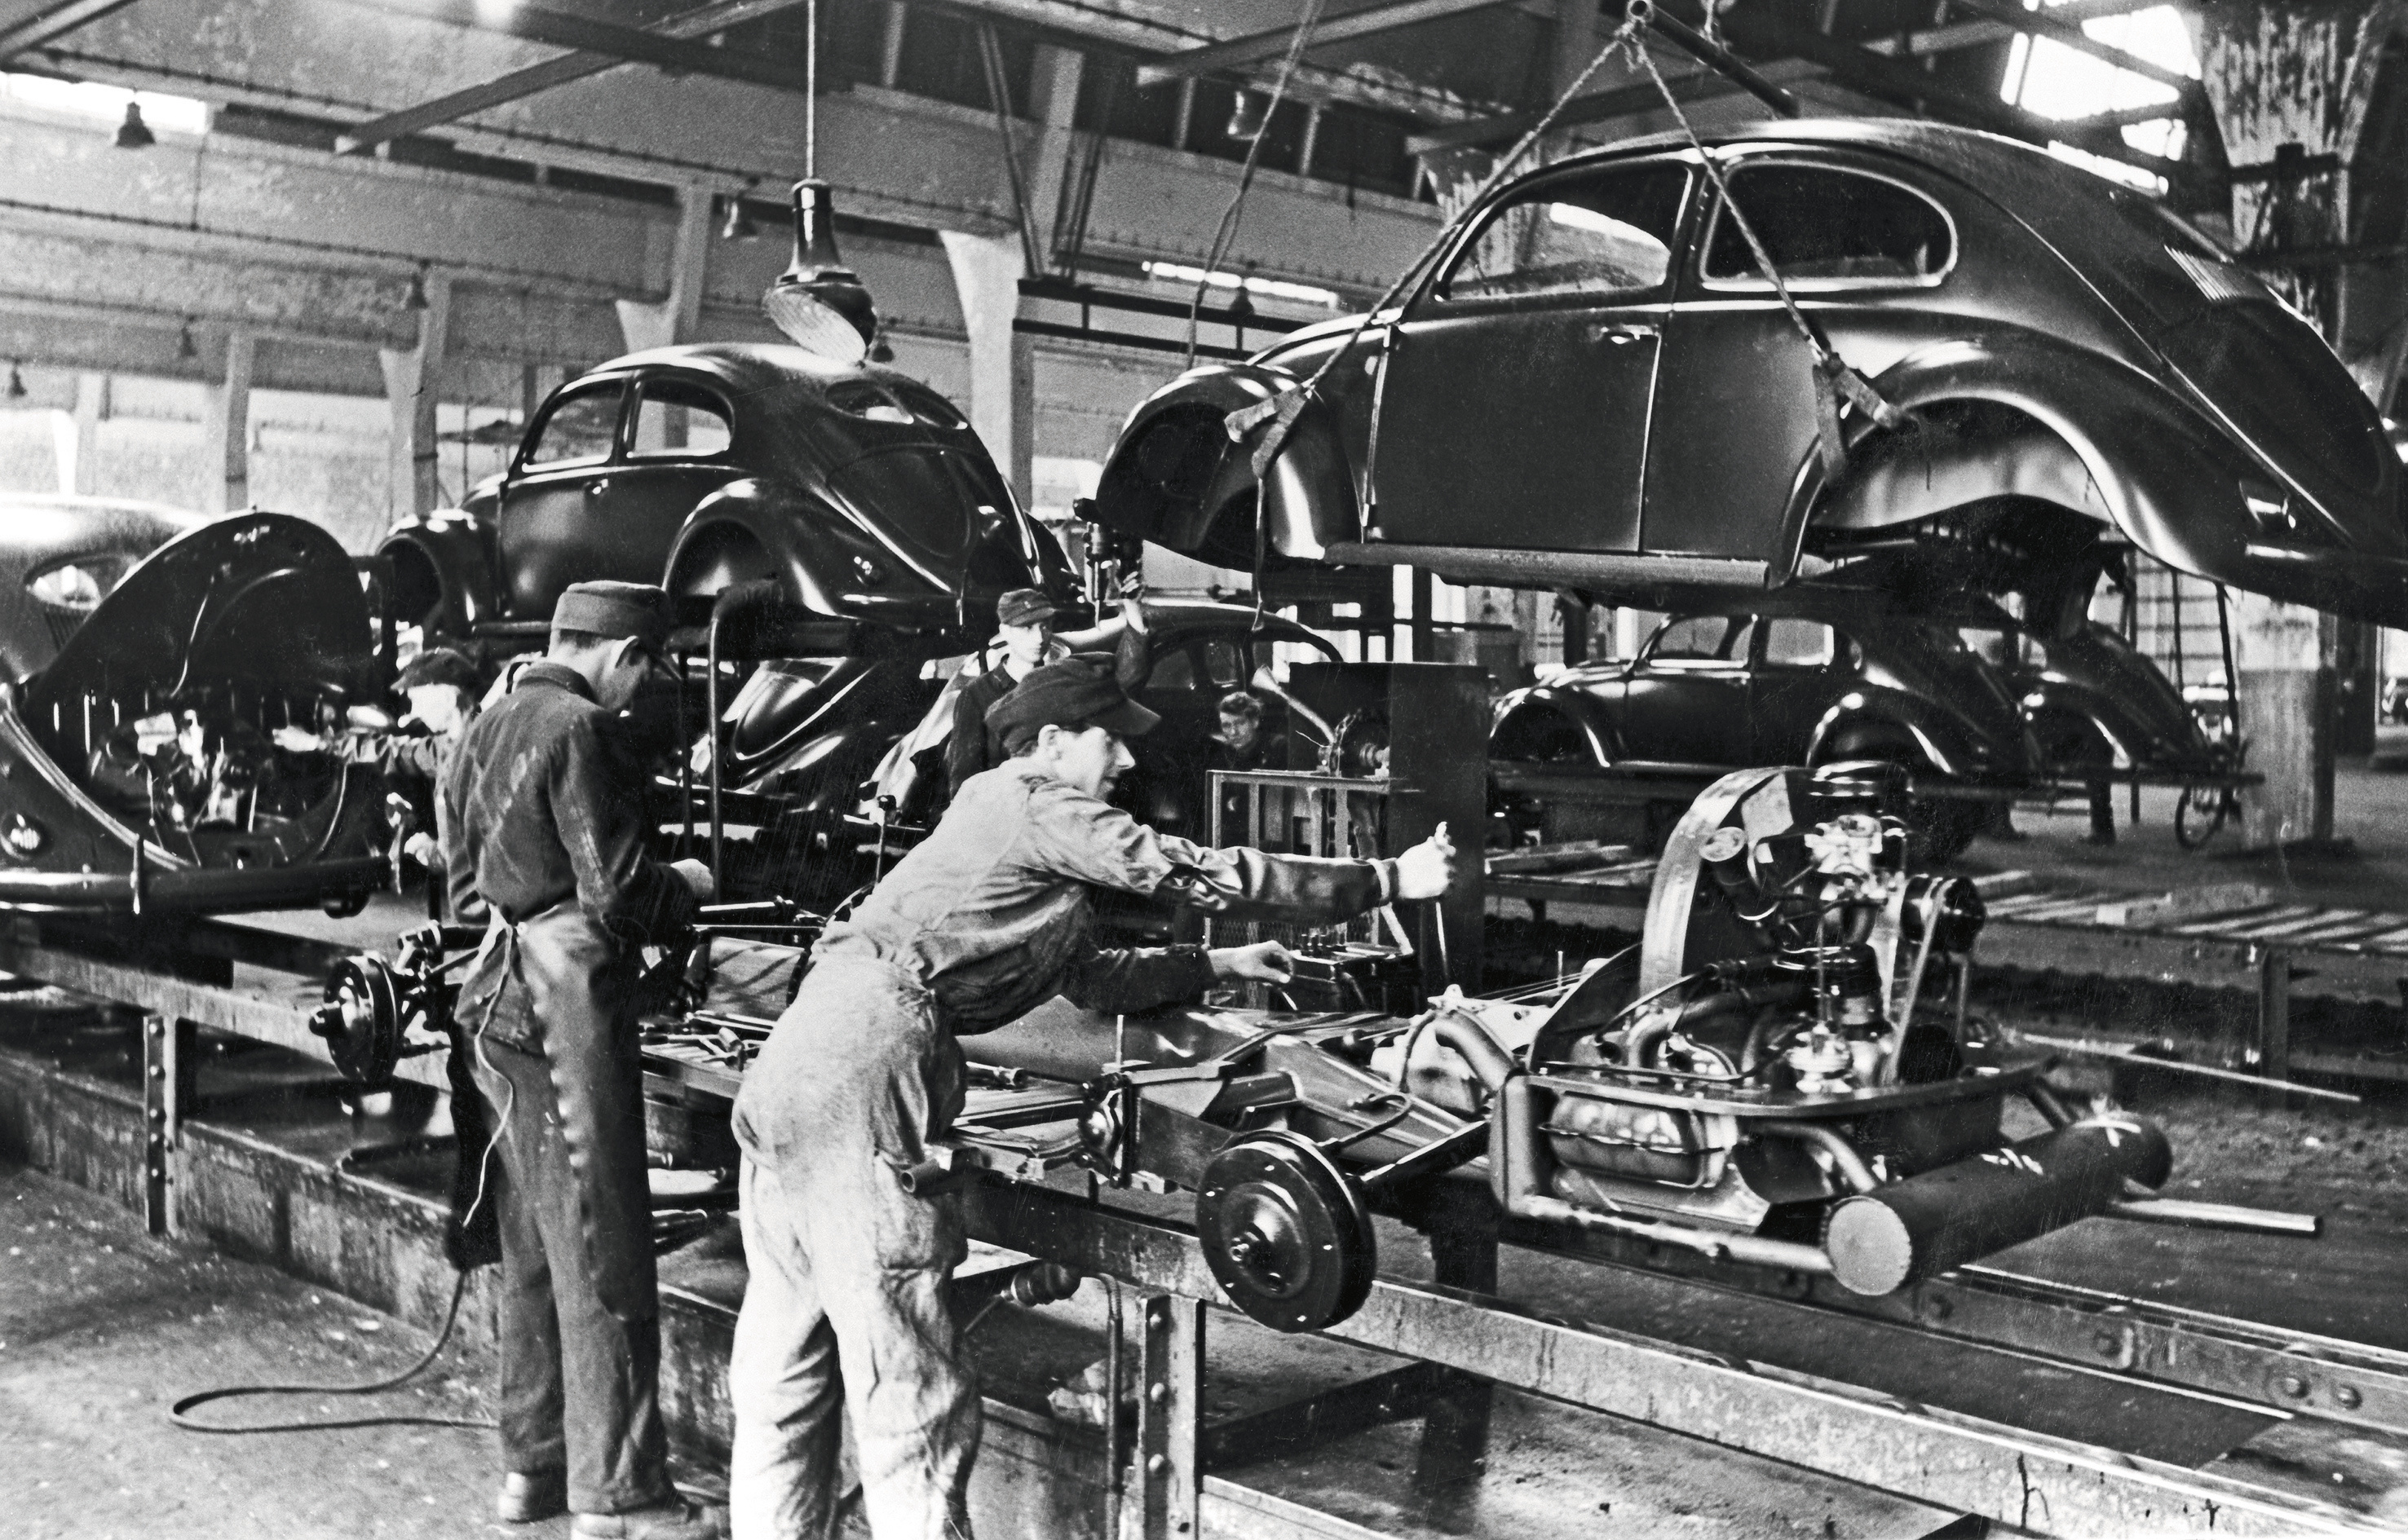 Volkswagen Beetle Production Began 75 Years Ago in Germany, by Way of the British Military